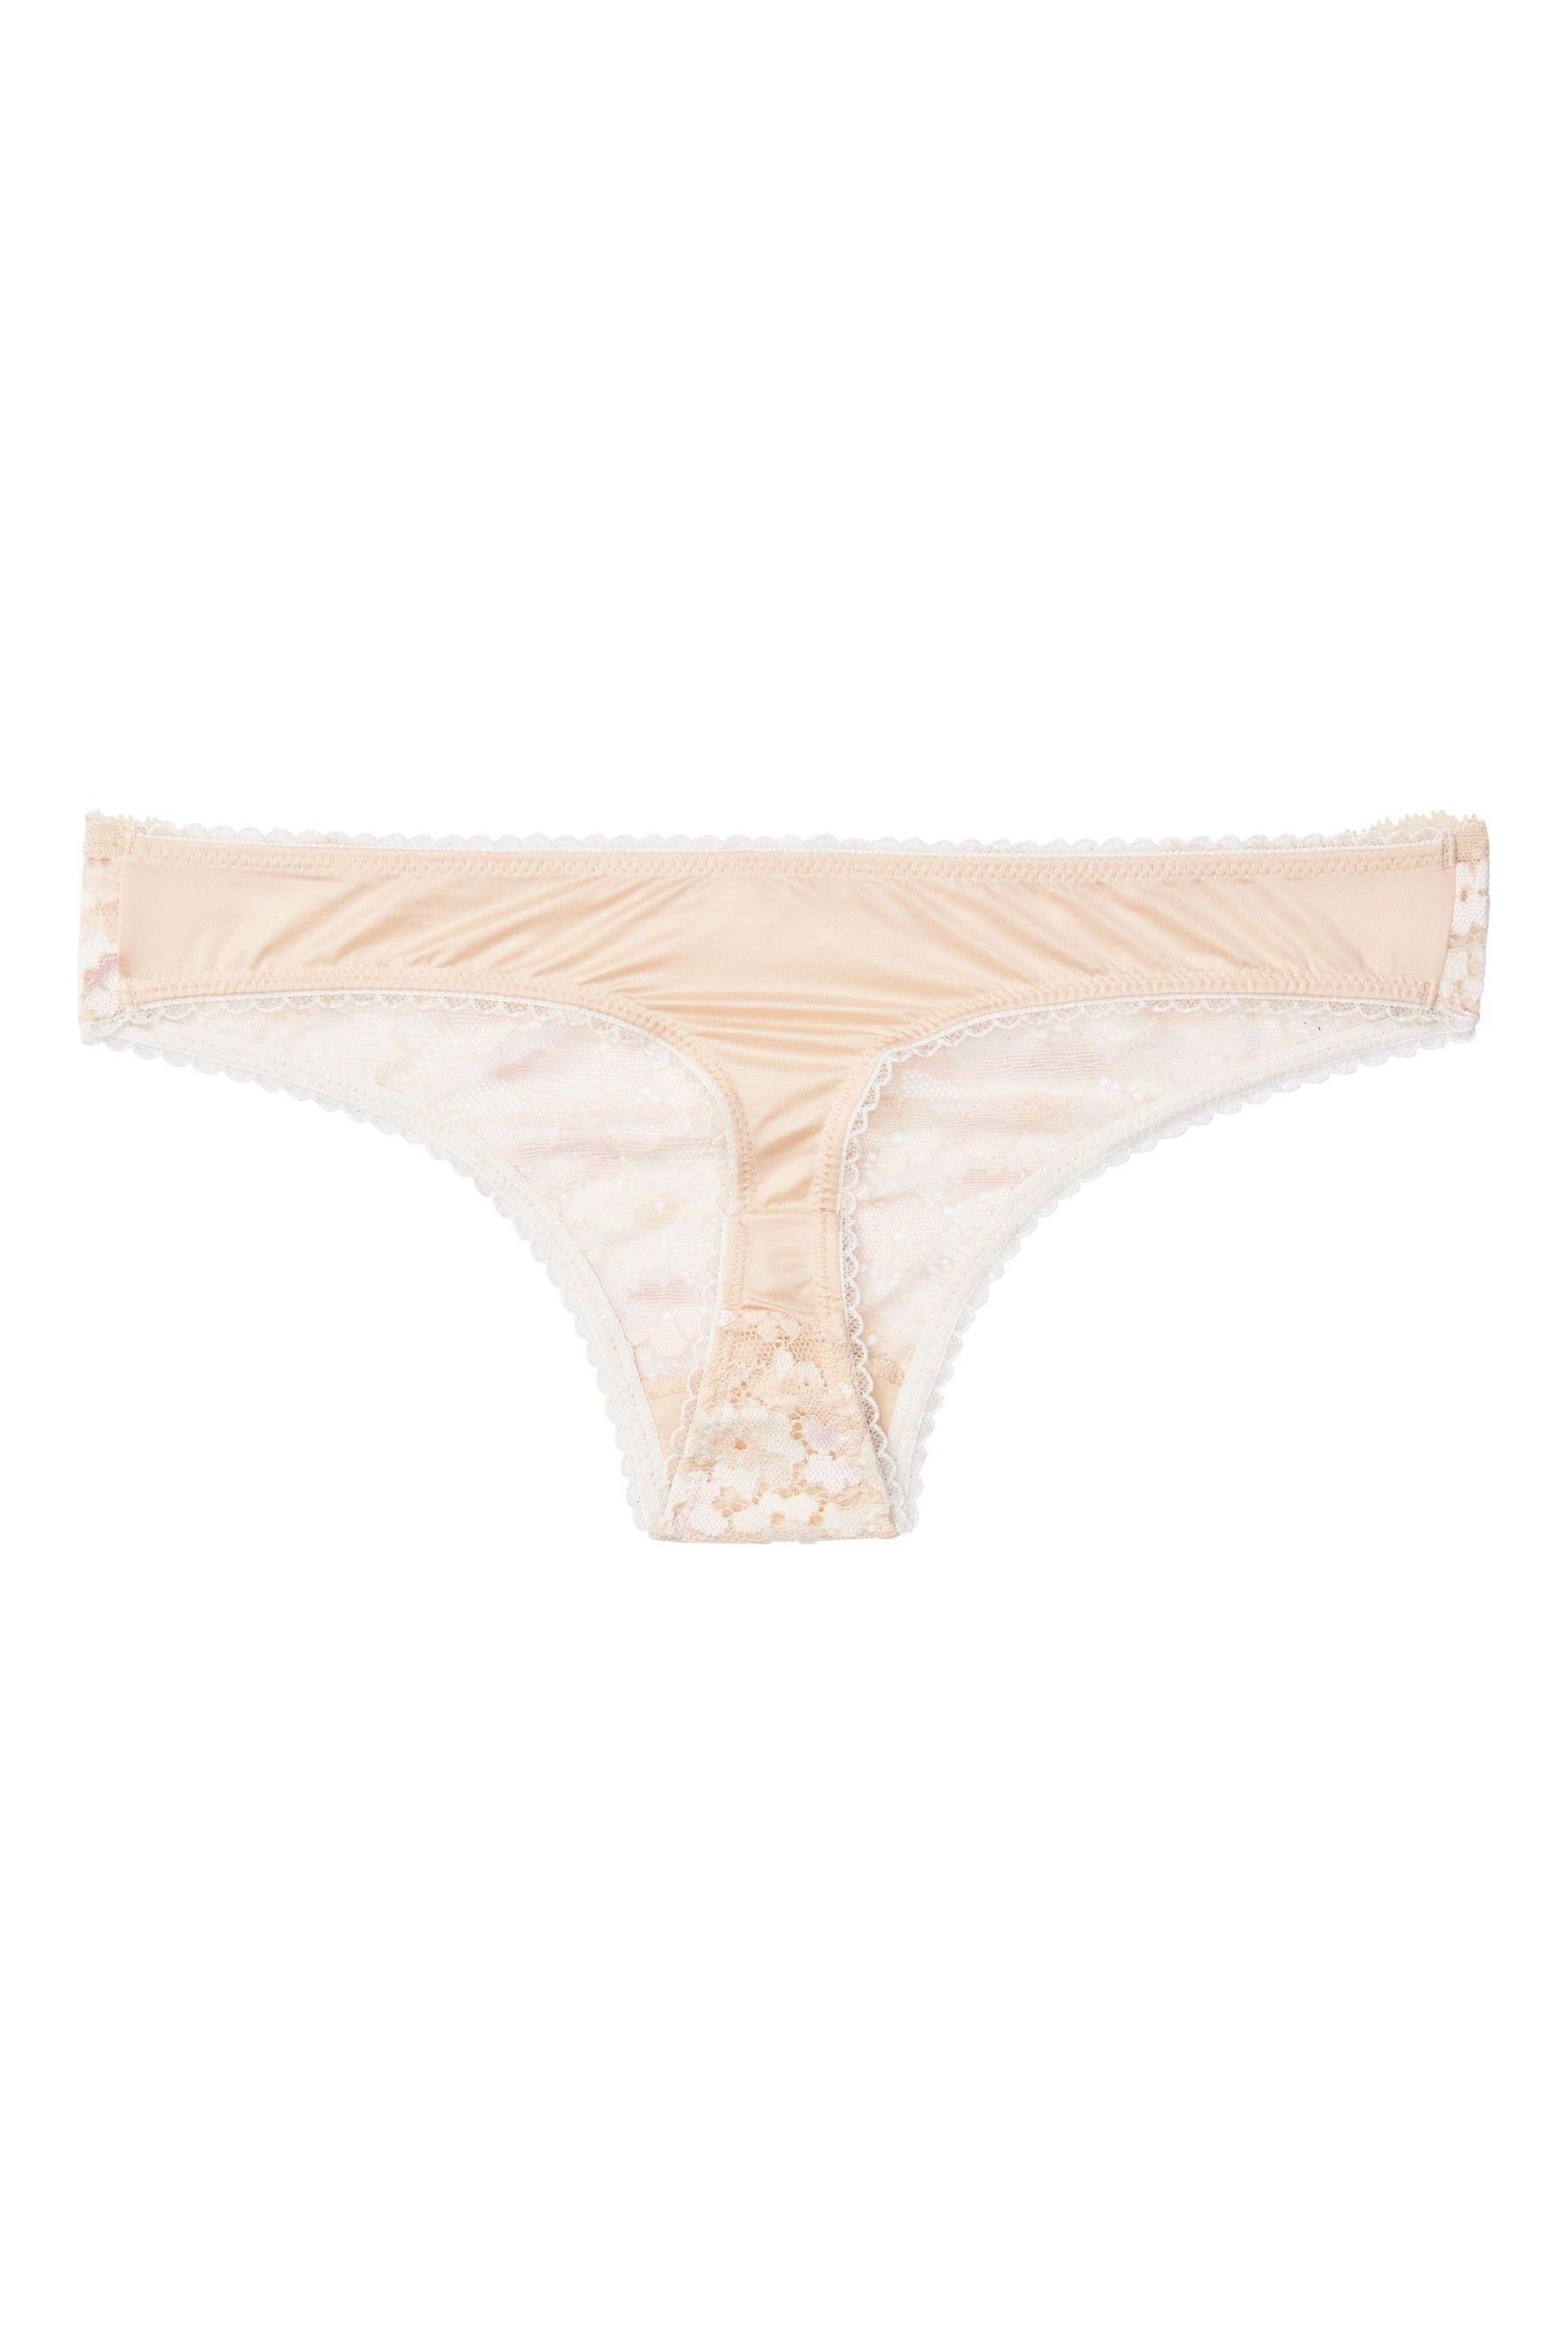 Buy Victoria's Secret Shimmer Lace & Micro Thong Panty from the ...